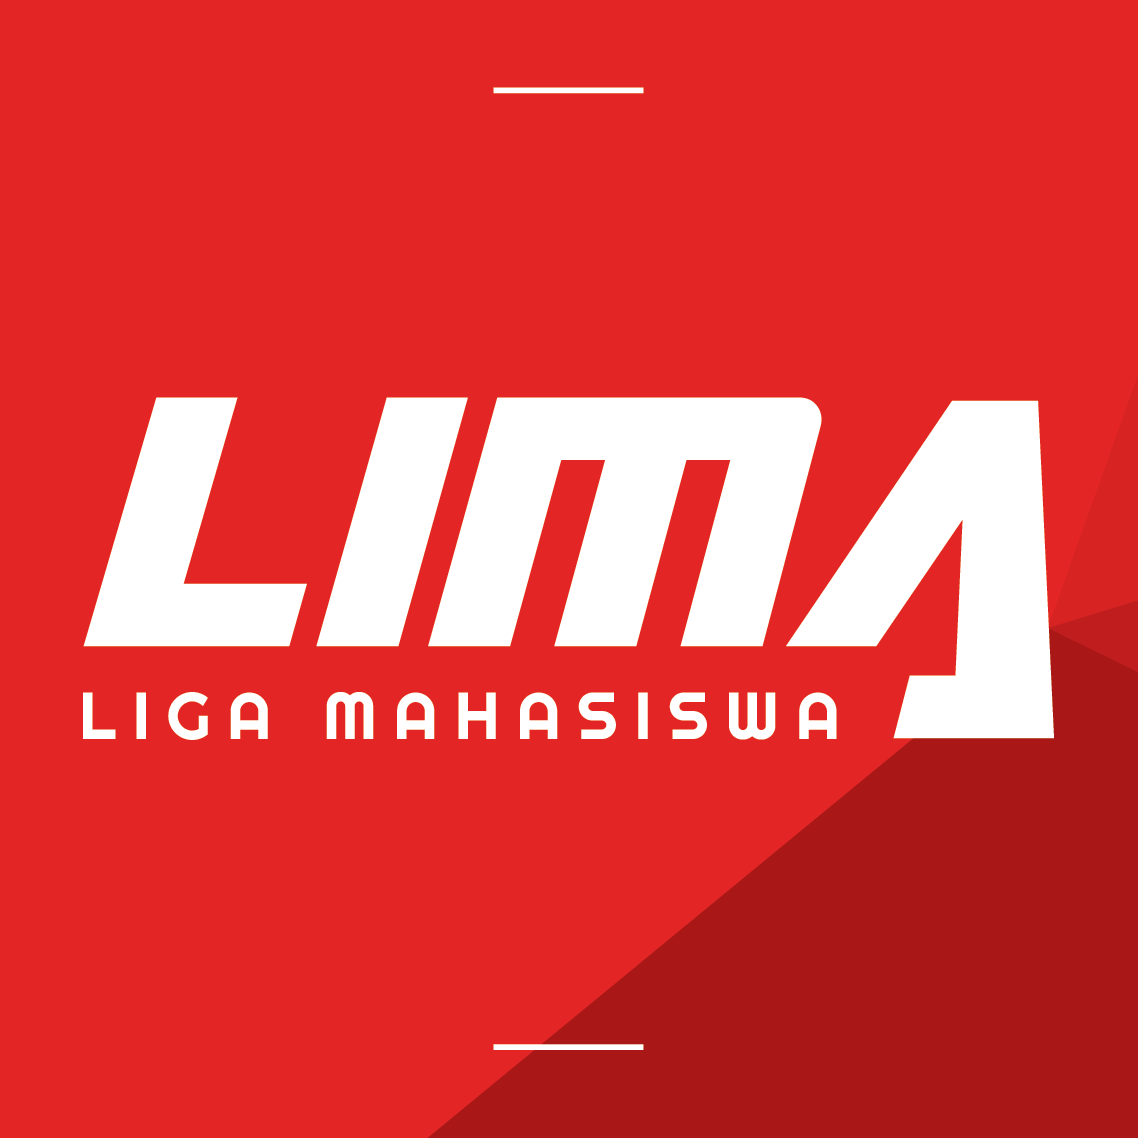 Official Twitter of @LigaMahasiswa Bulutangkis, the biggest University Sports League in Indonesia. Our Badminton Season starts from March - June annually.